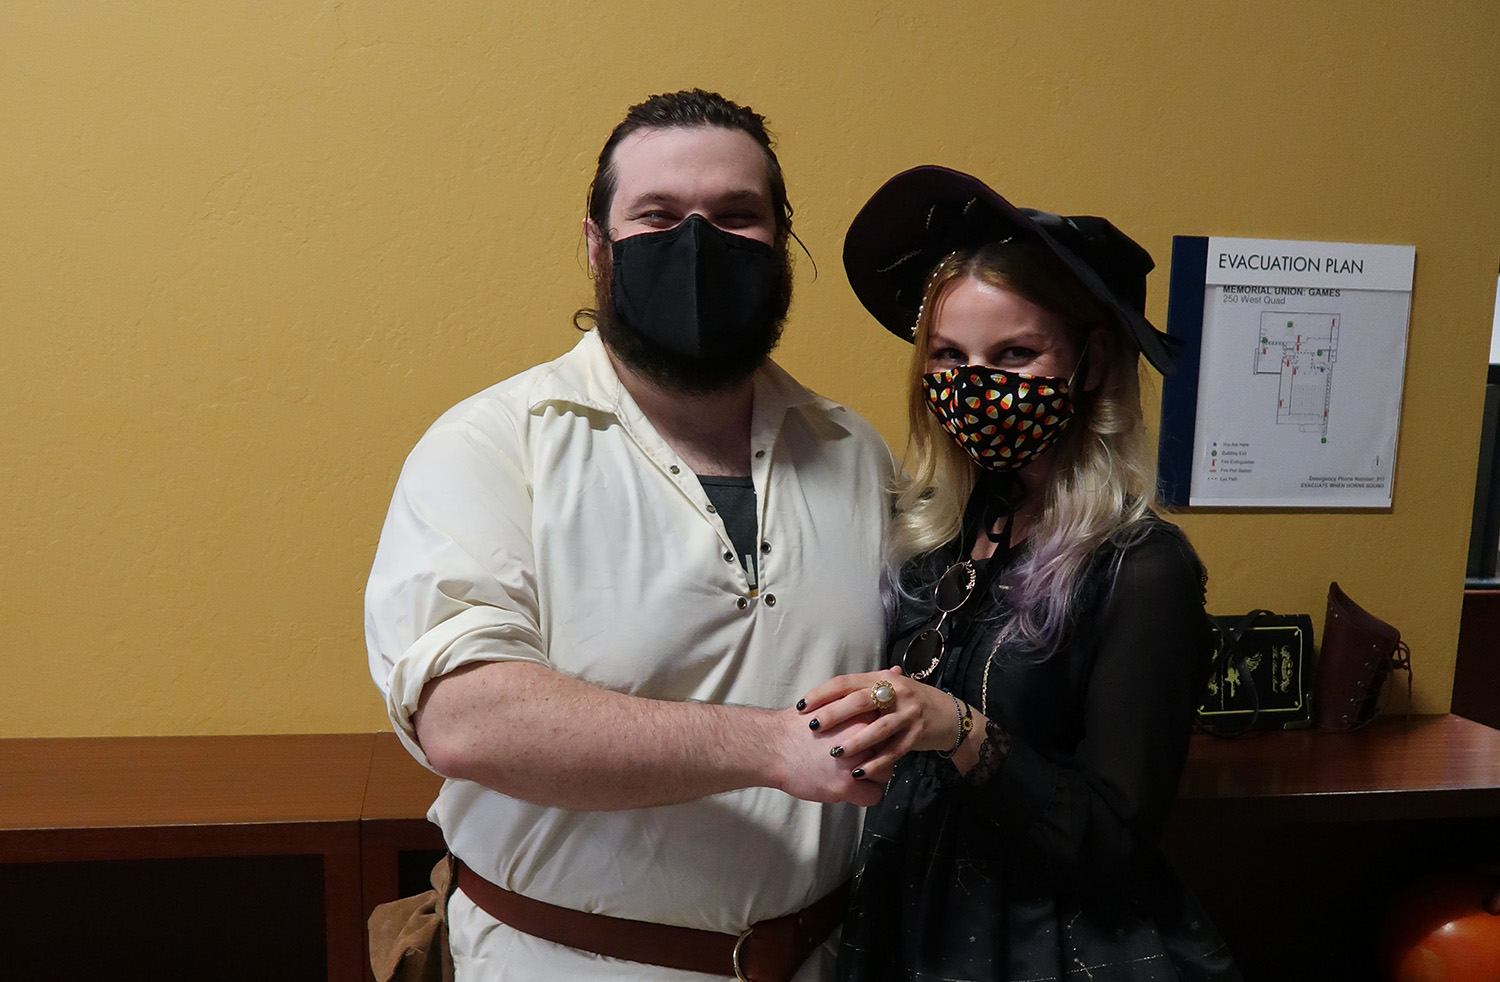 Student wearing a beige button-up and black mask smiling and holding hands with student wearing a black hat and candy corn mask.